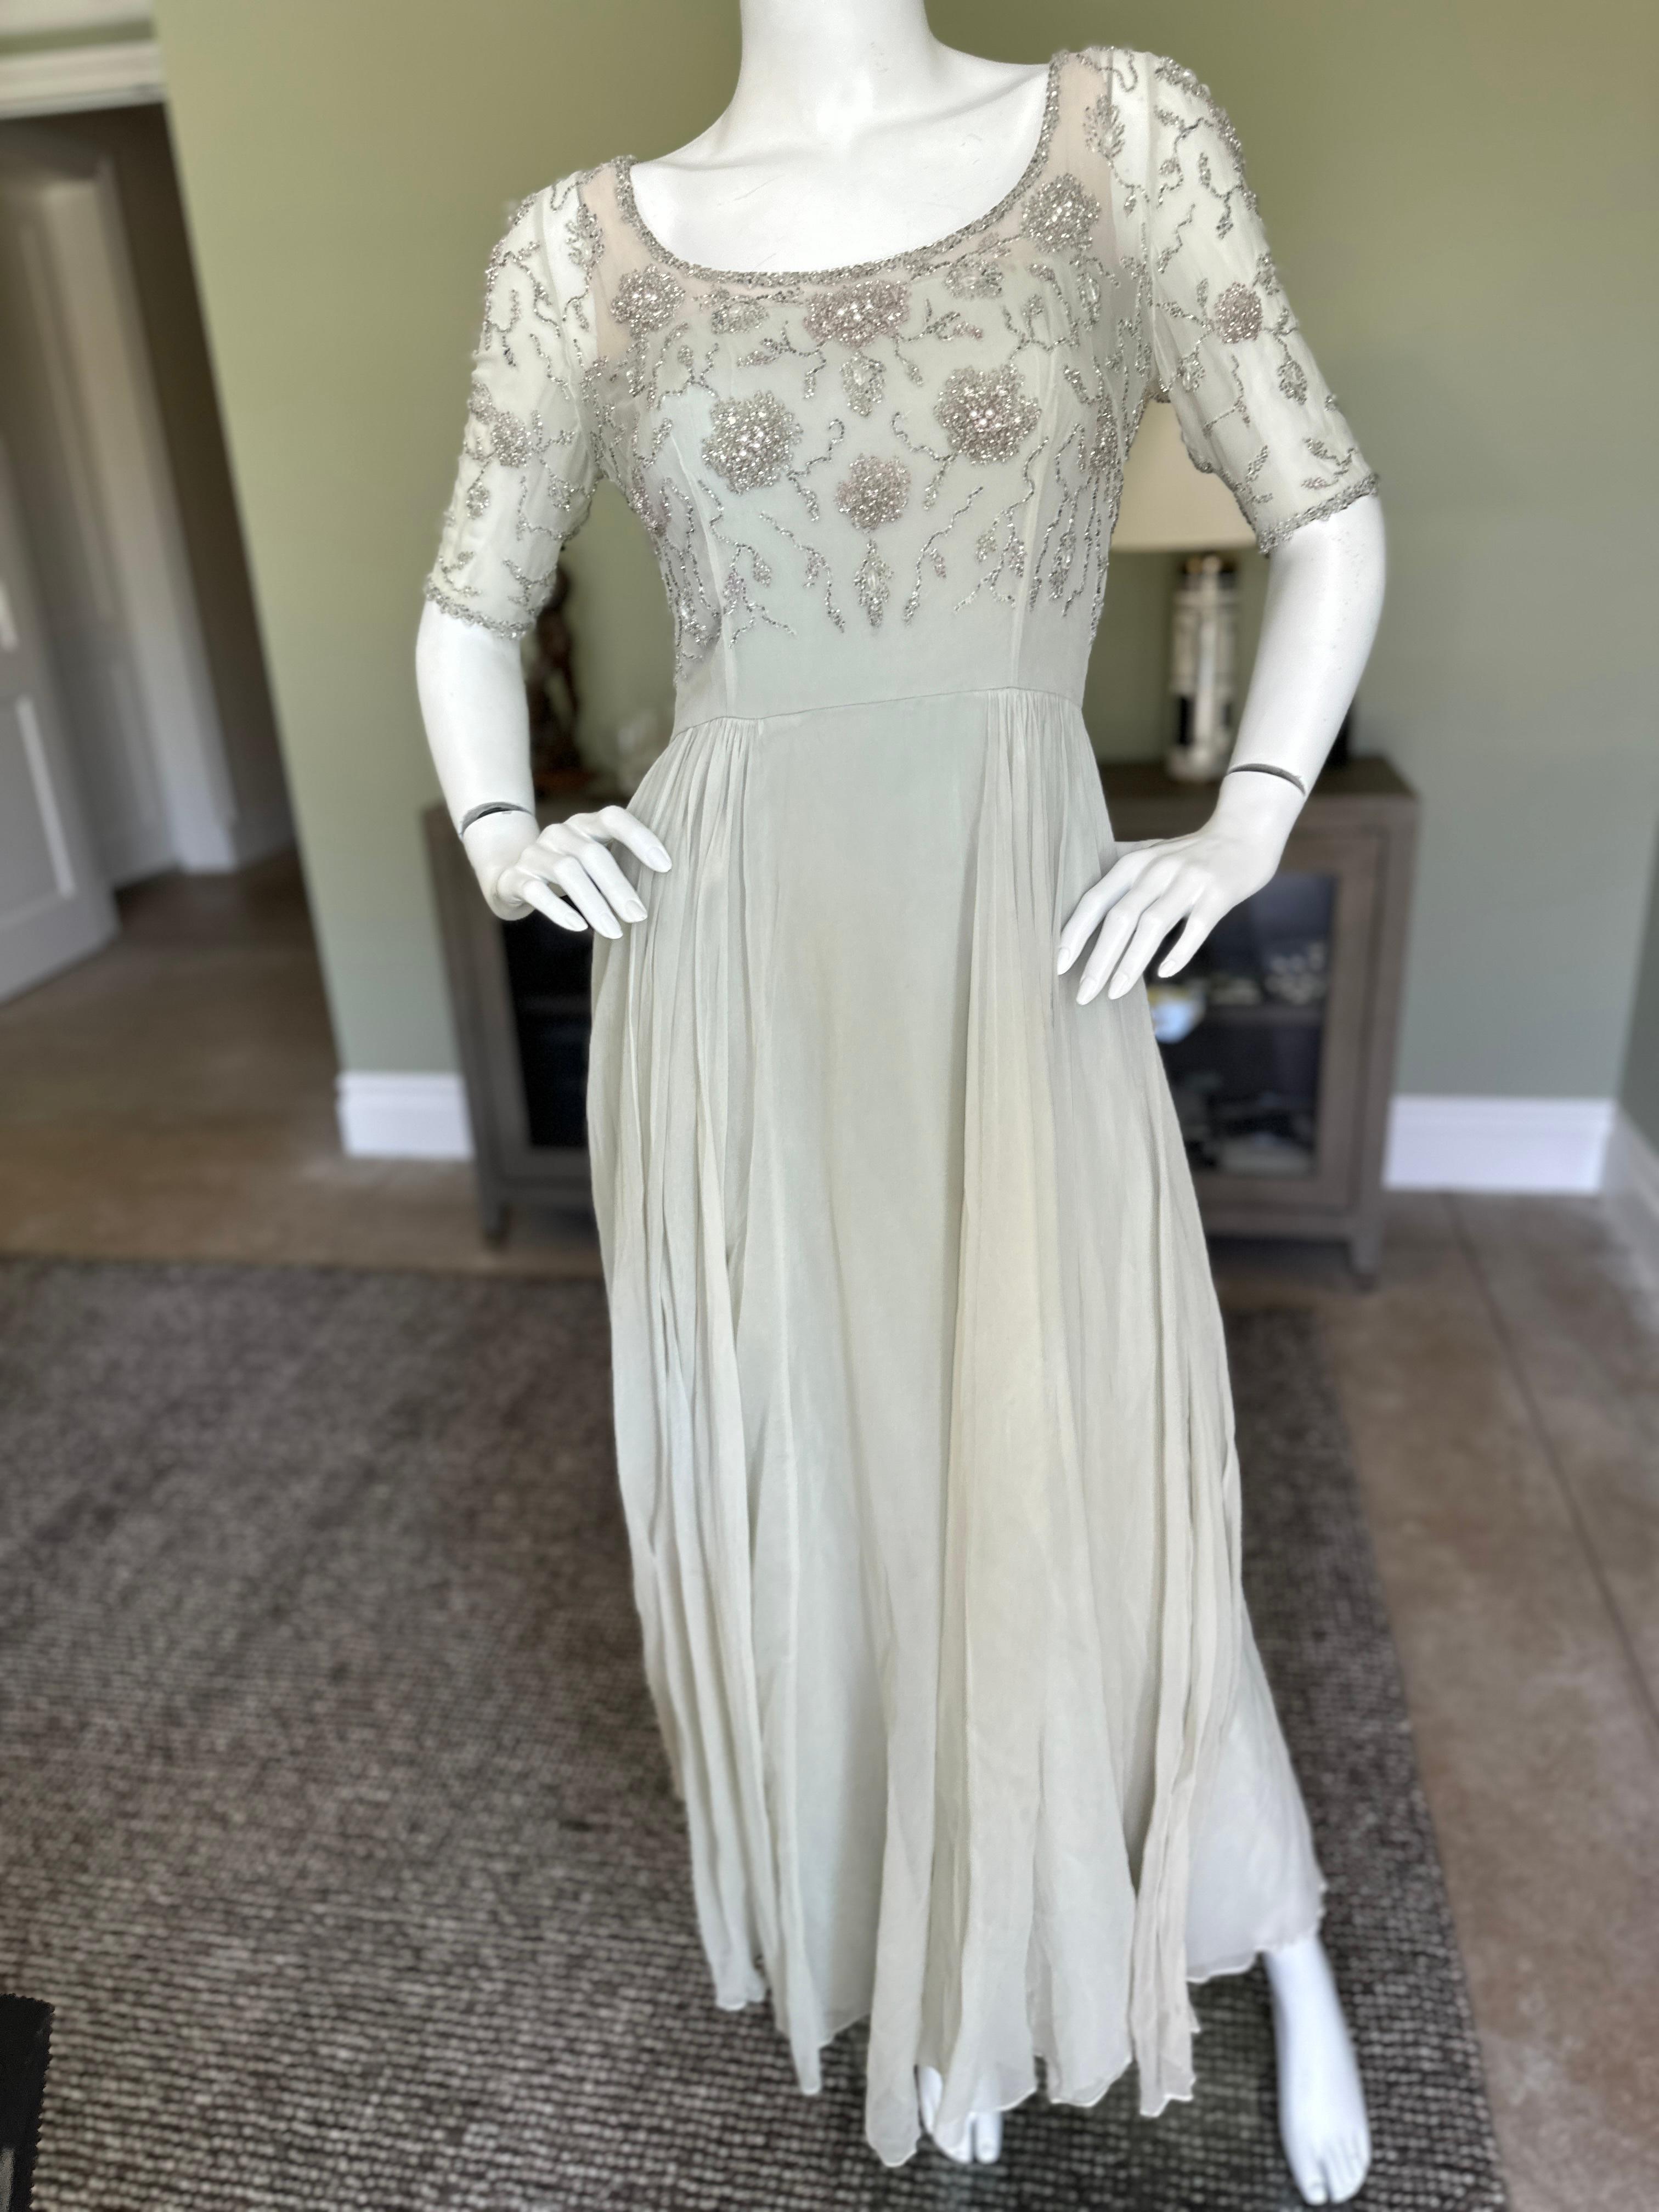  Malcolm Starr Vintage Evening Dress with Crystal Embellishments For Sale 4